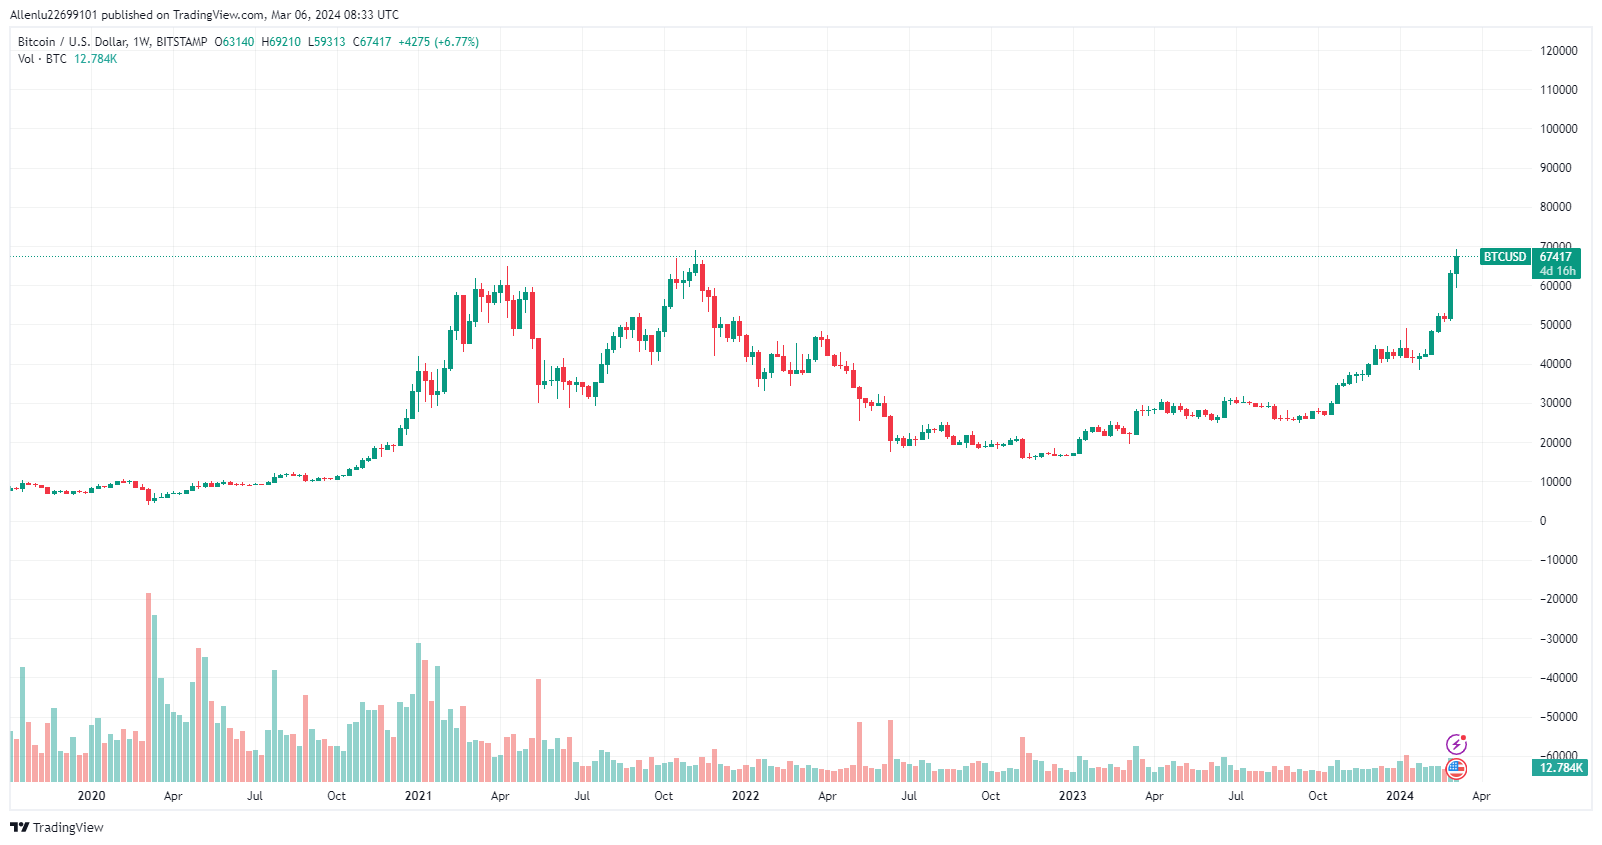 Bitcoin hits new record high above $69,000; Source: TradingView